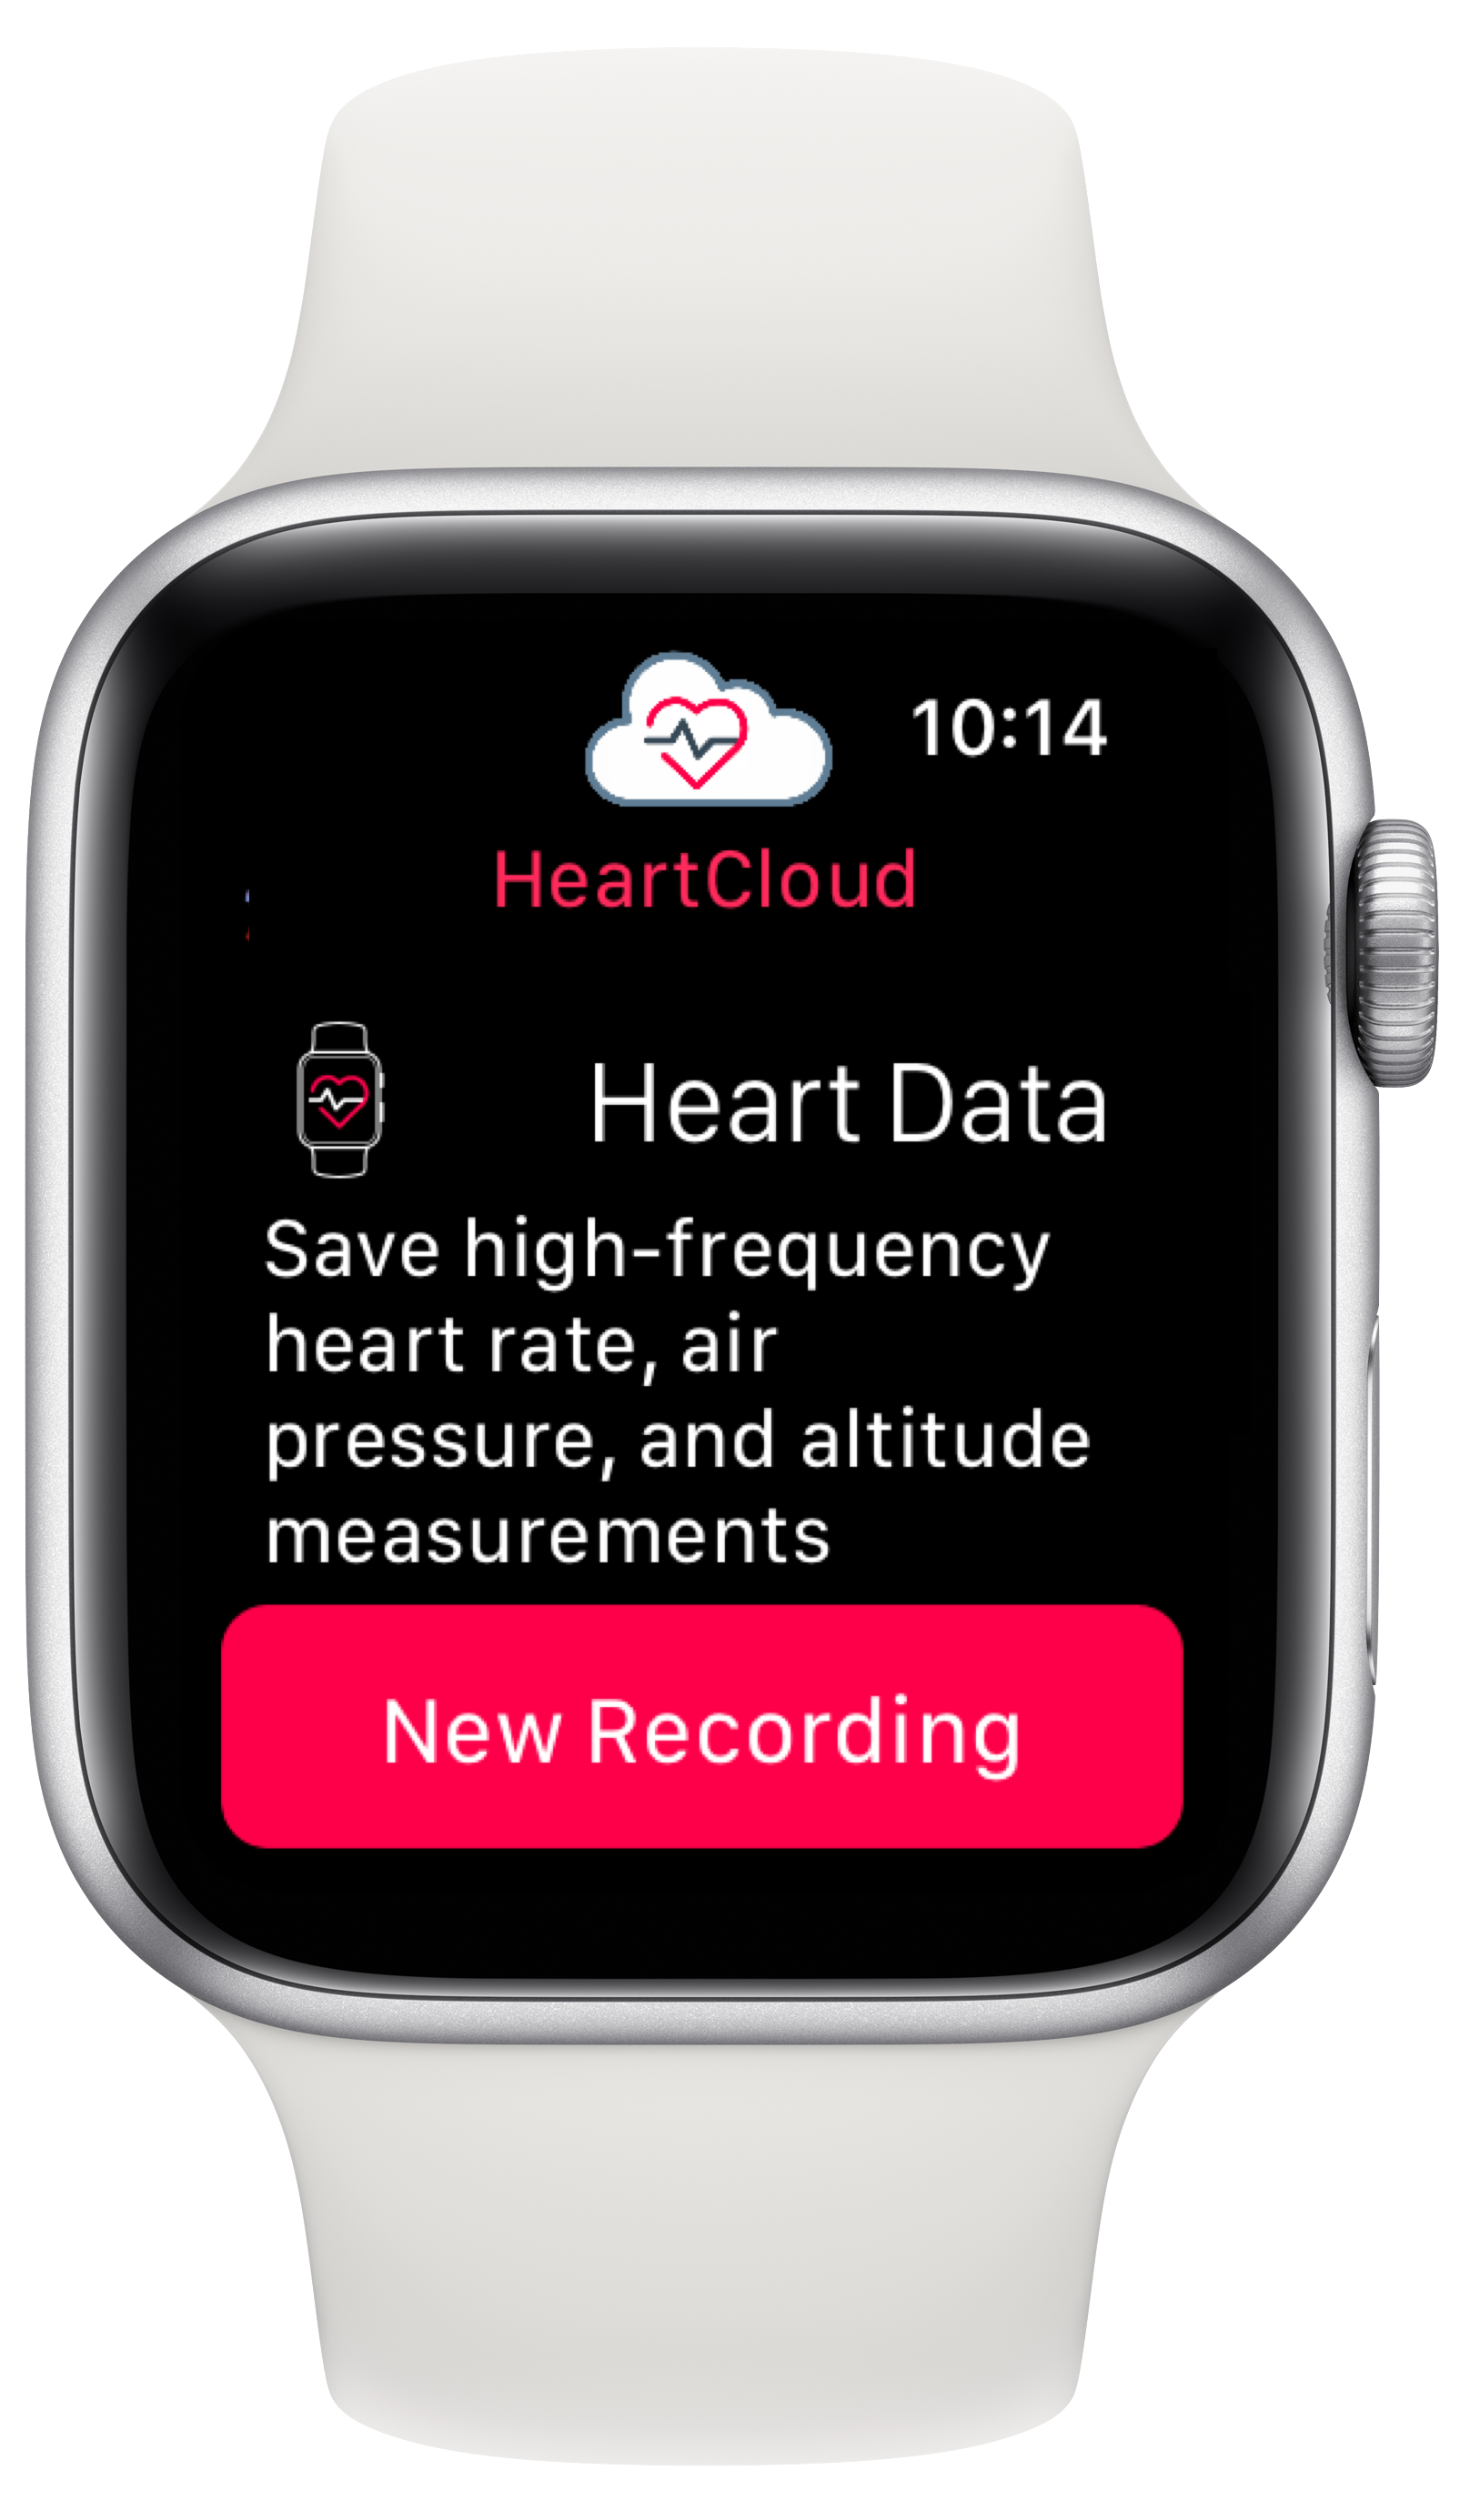 Patients Can Record High-Frequency and Continuous Heart Rate Data Anytime To Share With A Clinician